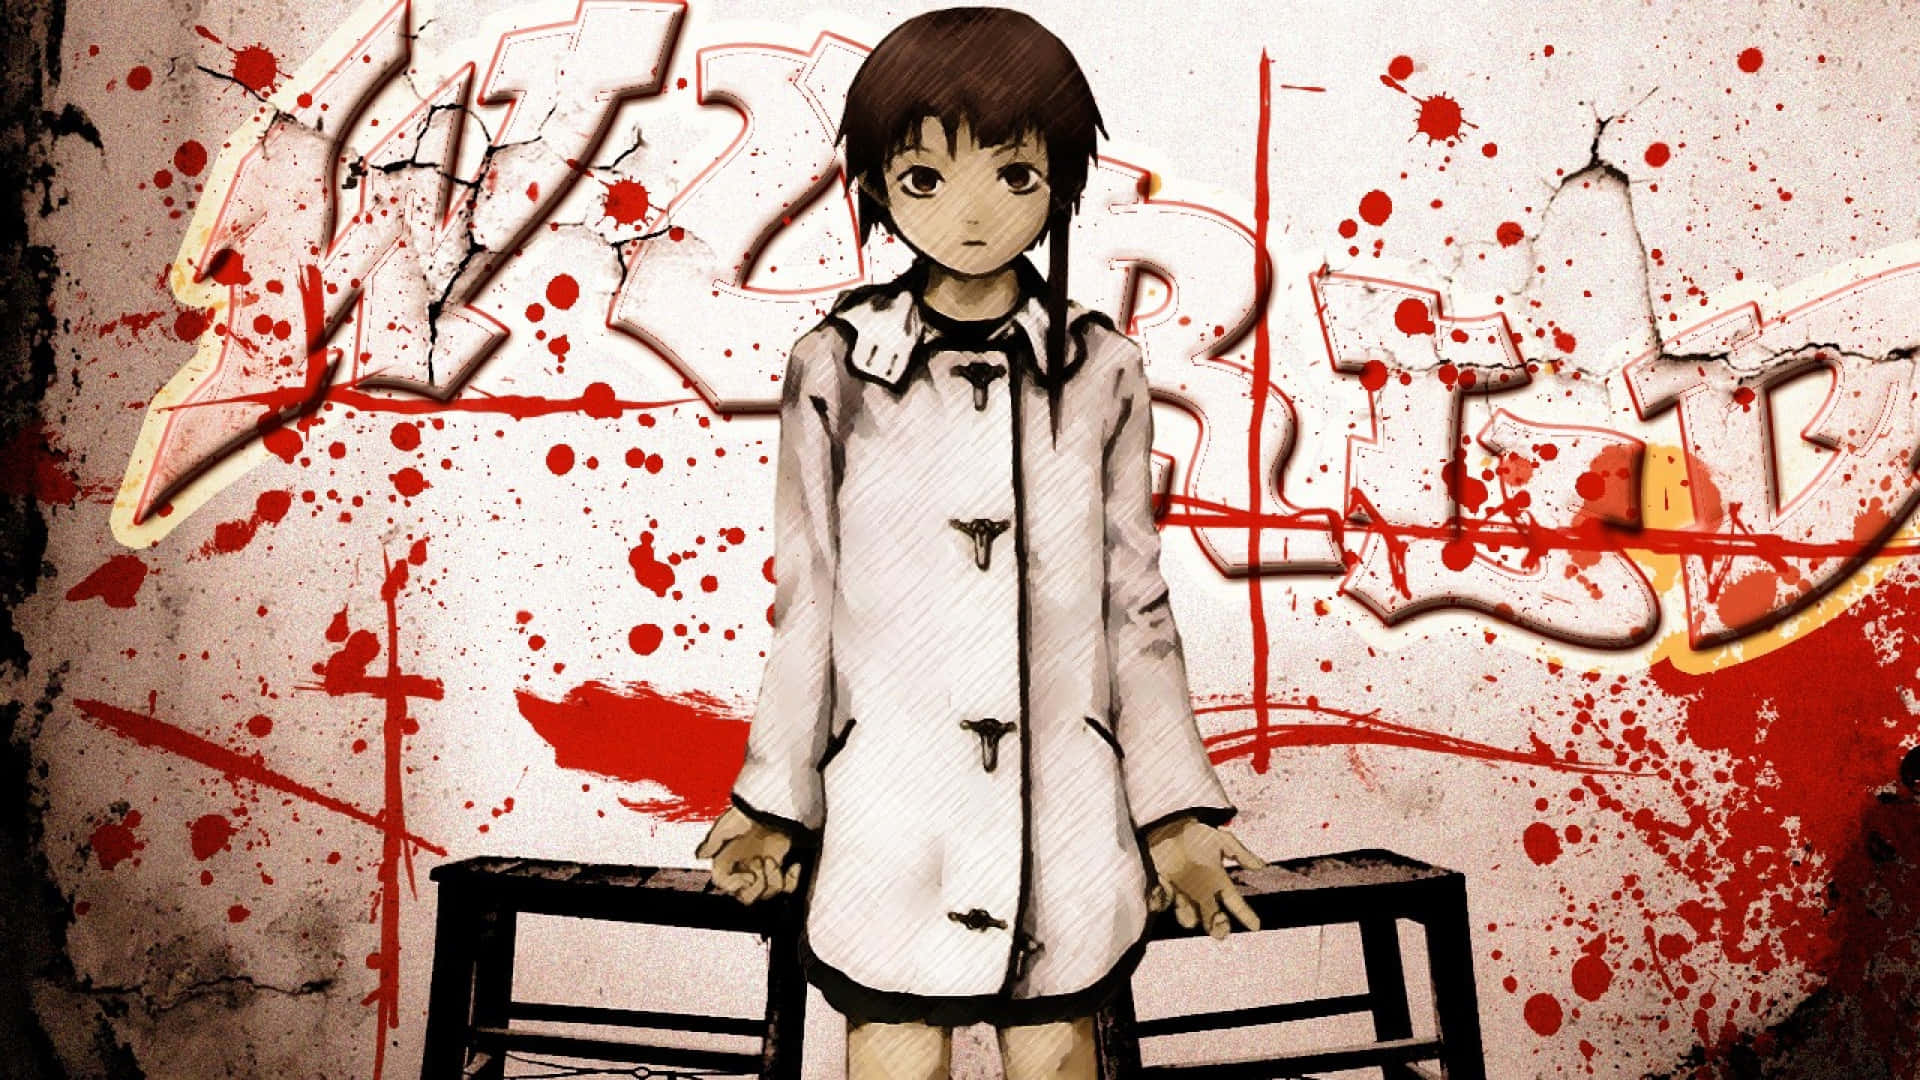 Serial Experiments Lain, A Masterpiece Of Surreal Anime